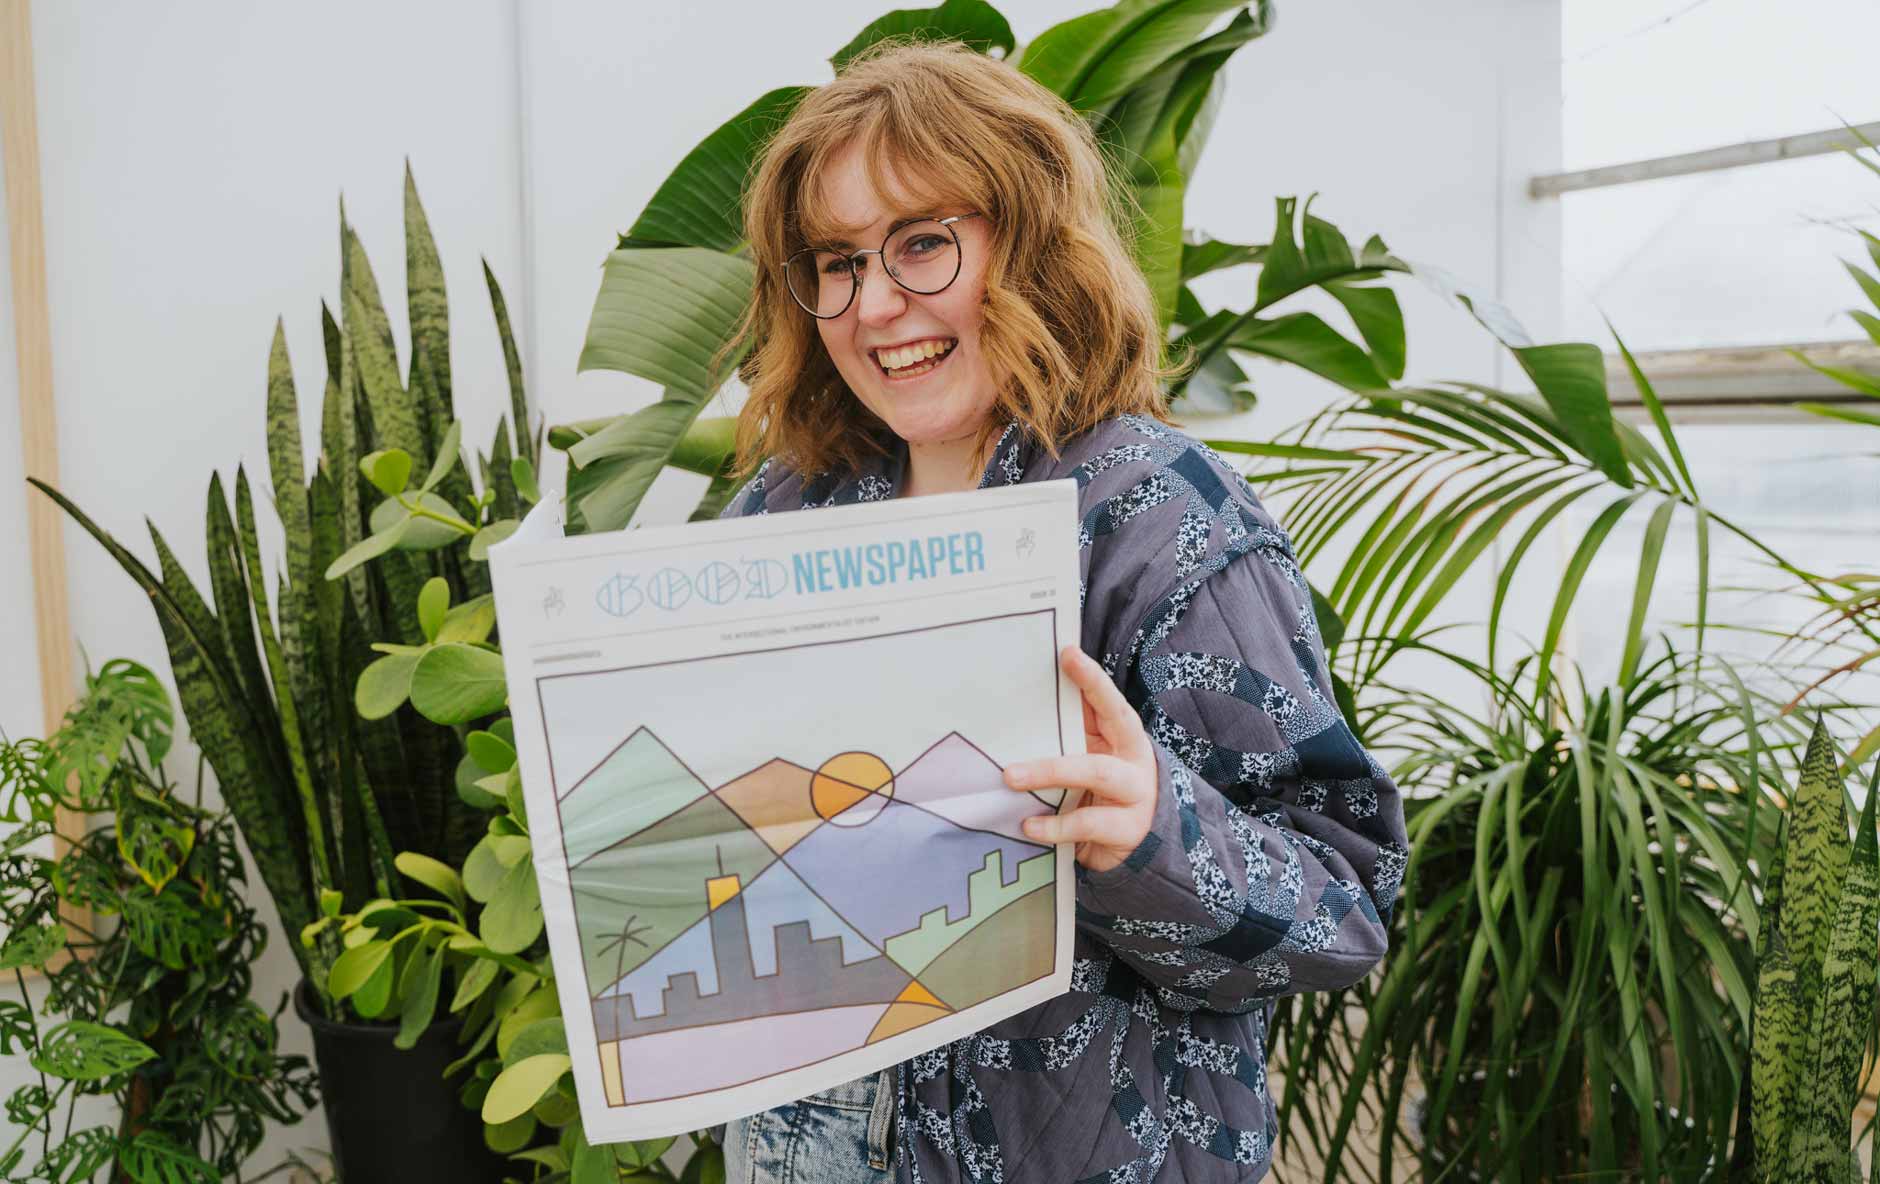 A person smiles while holding the Goodnewspaper: a colorful print newspaper filled with good news